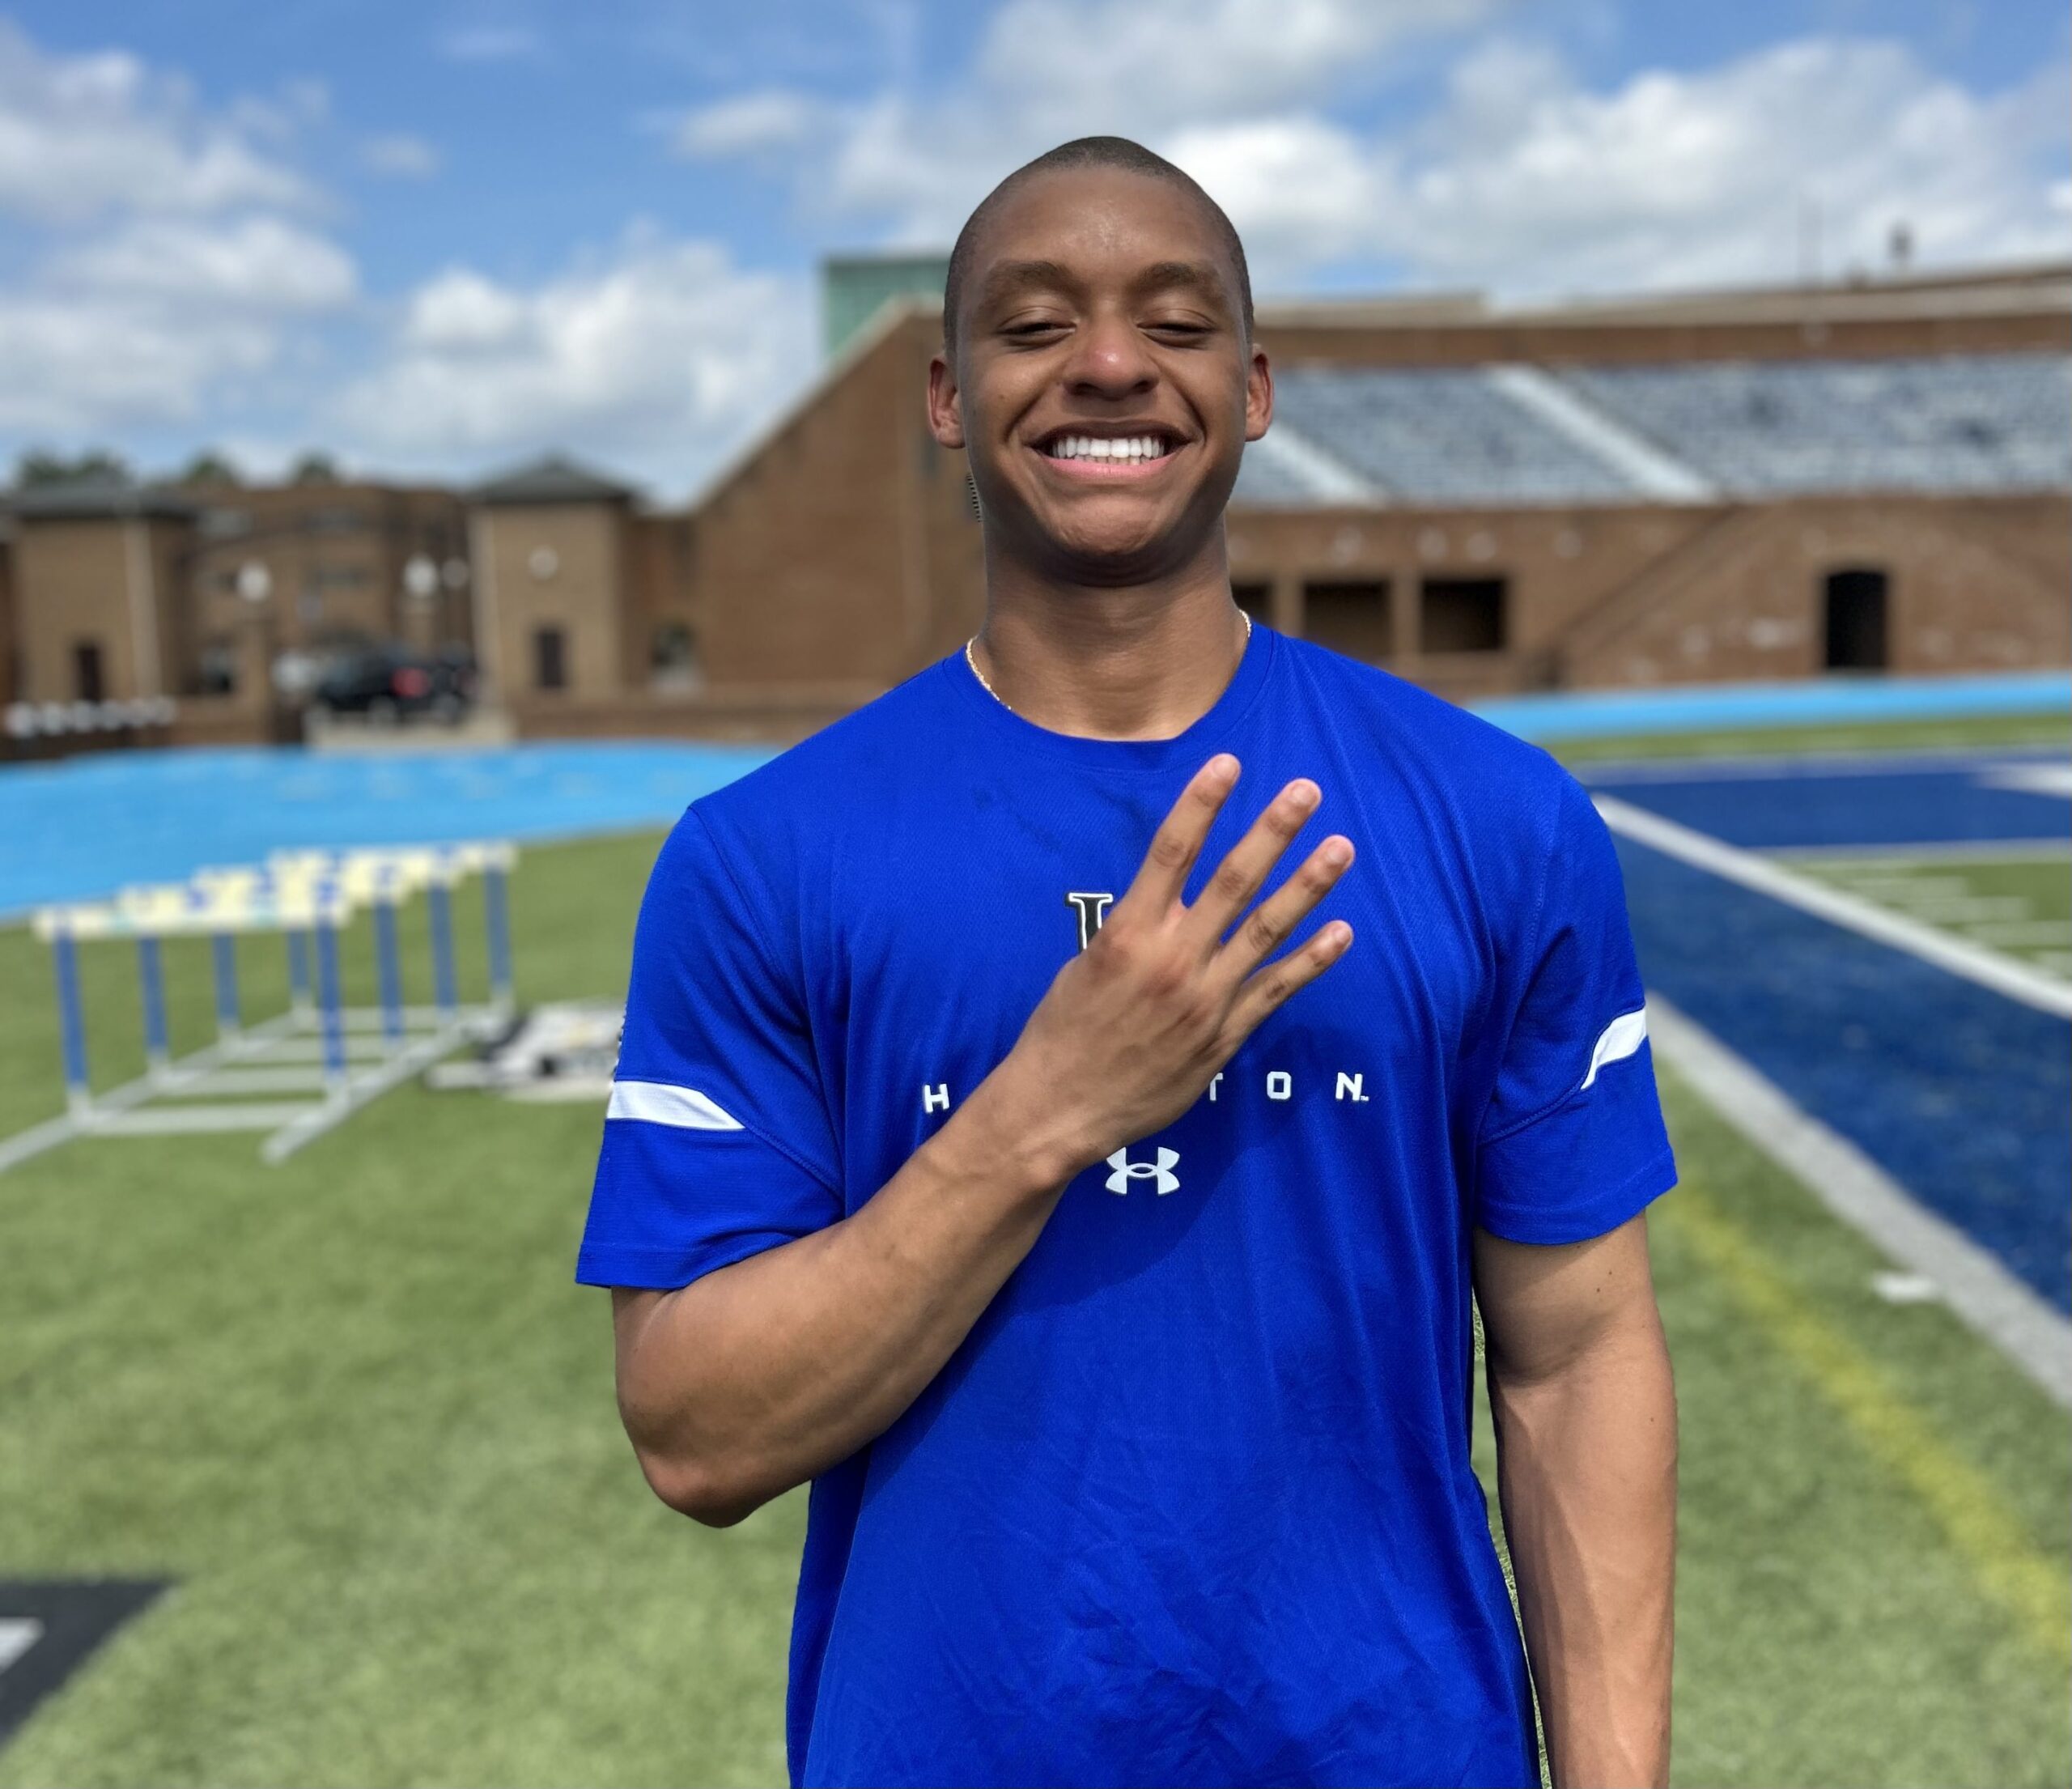 “I want to do the same thing I did in high school but on another level”: Hampton University Track Star Speaks